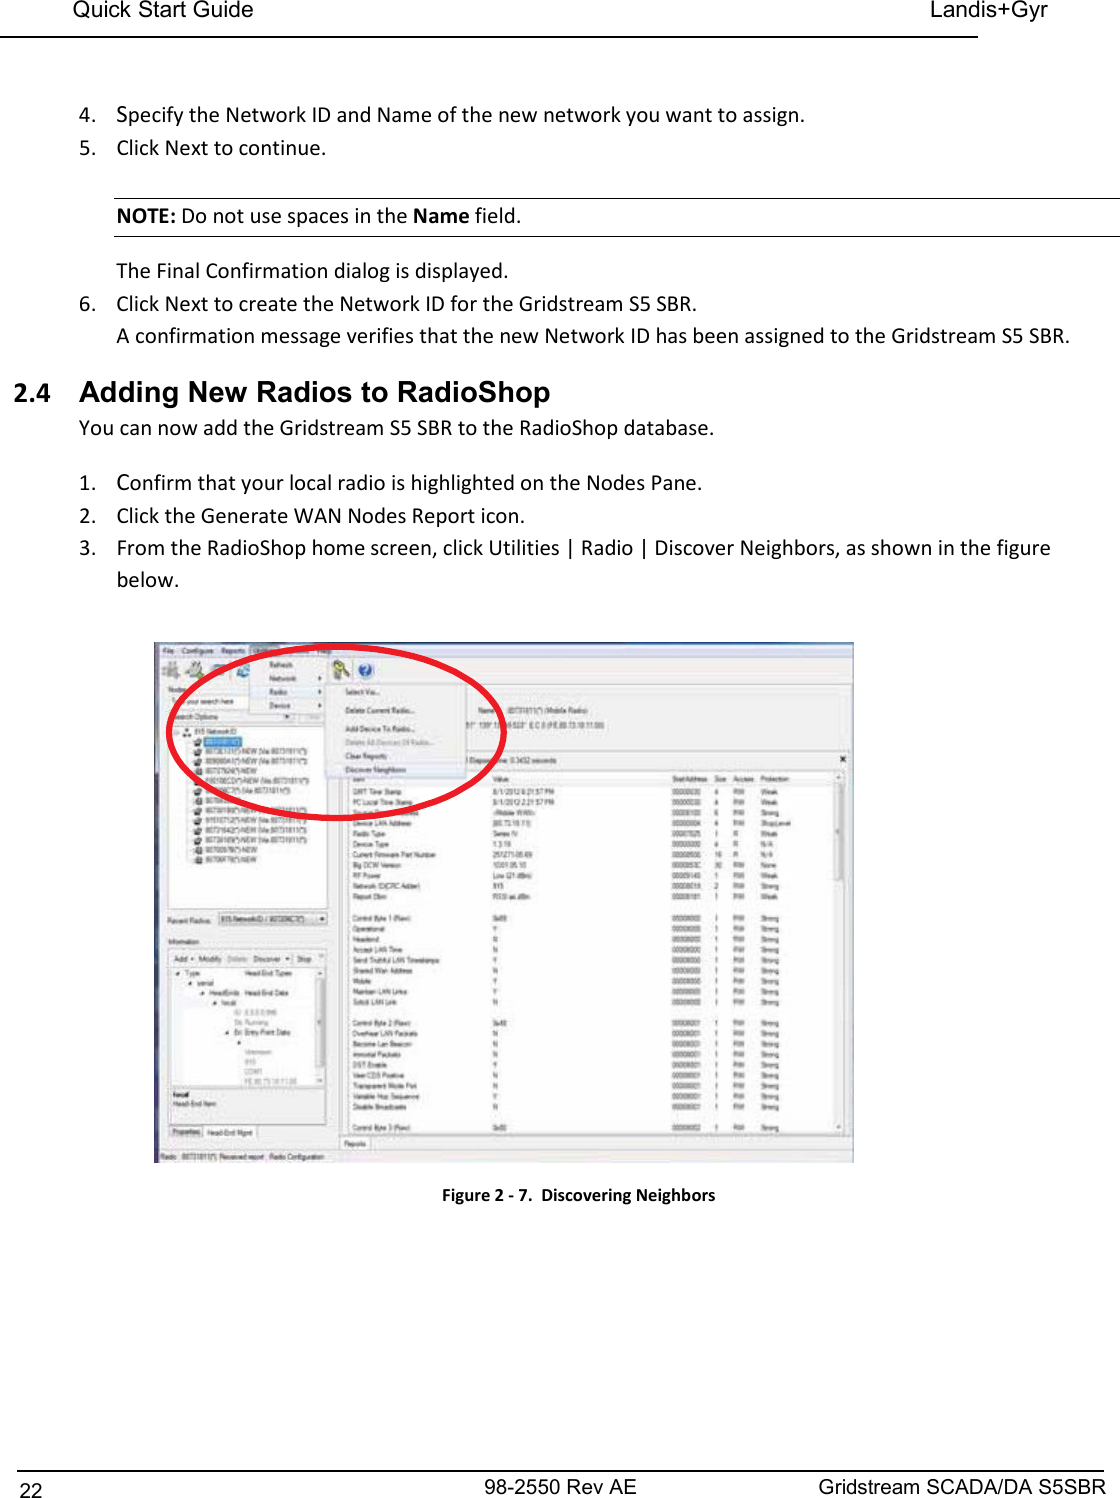 98-2550 Rev AE 22 Gridstream SCADA/DA S5SBR Quick Start Guide    Landis+Gyr    4. Specify the Network ID and Name of the new network you want to assign. 5. Click Next to continue.  NOTE: Do not use spaces in the Name field. The Final Confirmation dialog is displayed. 6. Click Next to create the Network ID for the Gridstream S5 SBR. A confirmation message verifies that the new Network ID has been assigned to the Gridstream S5 SBR. 2.4  Adding New Radios to RadioShop You can now add the Gridstream S5 SBR to the RadioShop database. 1. Confirm that your local radio is highlighted on the Nodes Pane. 2. Click the Generate WAN Nodes Report icon. 3. From the RadioShop home screen, click Utilities | Radio | Discover Neighbors, as shown in the figure below.   Figure 2 - 7.  Discovering Neighbors 